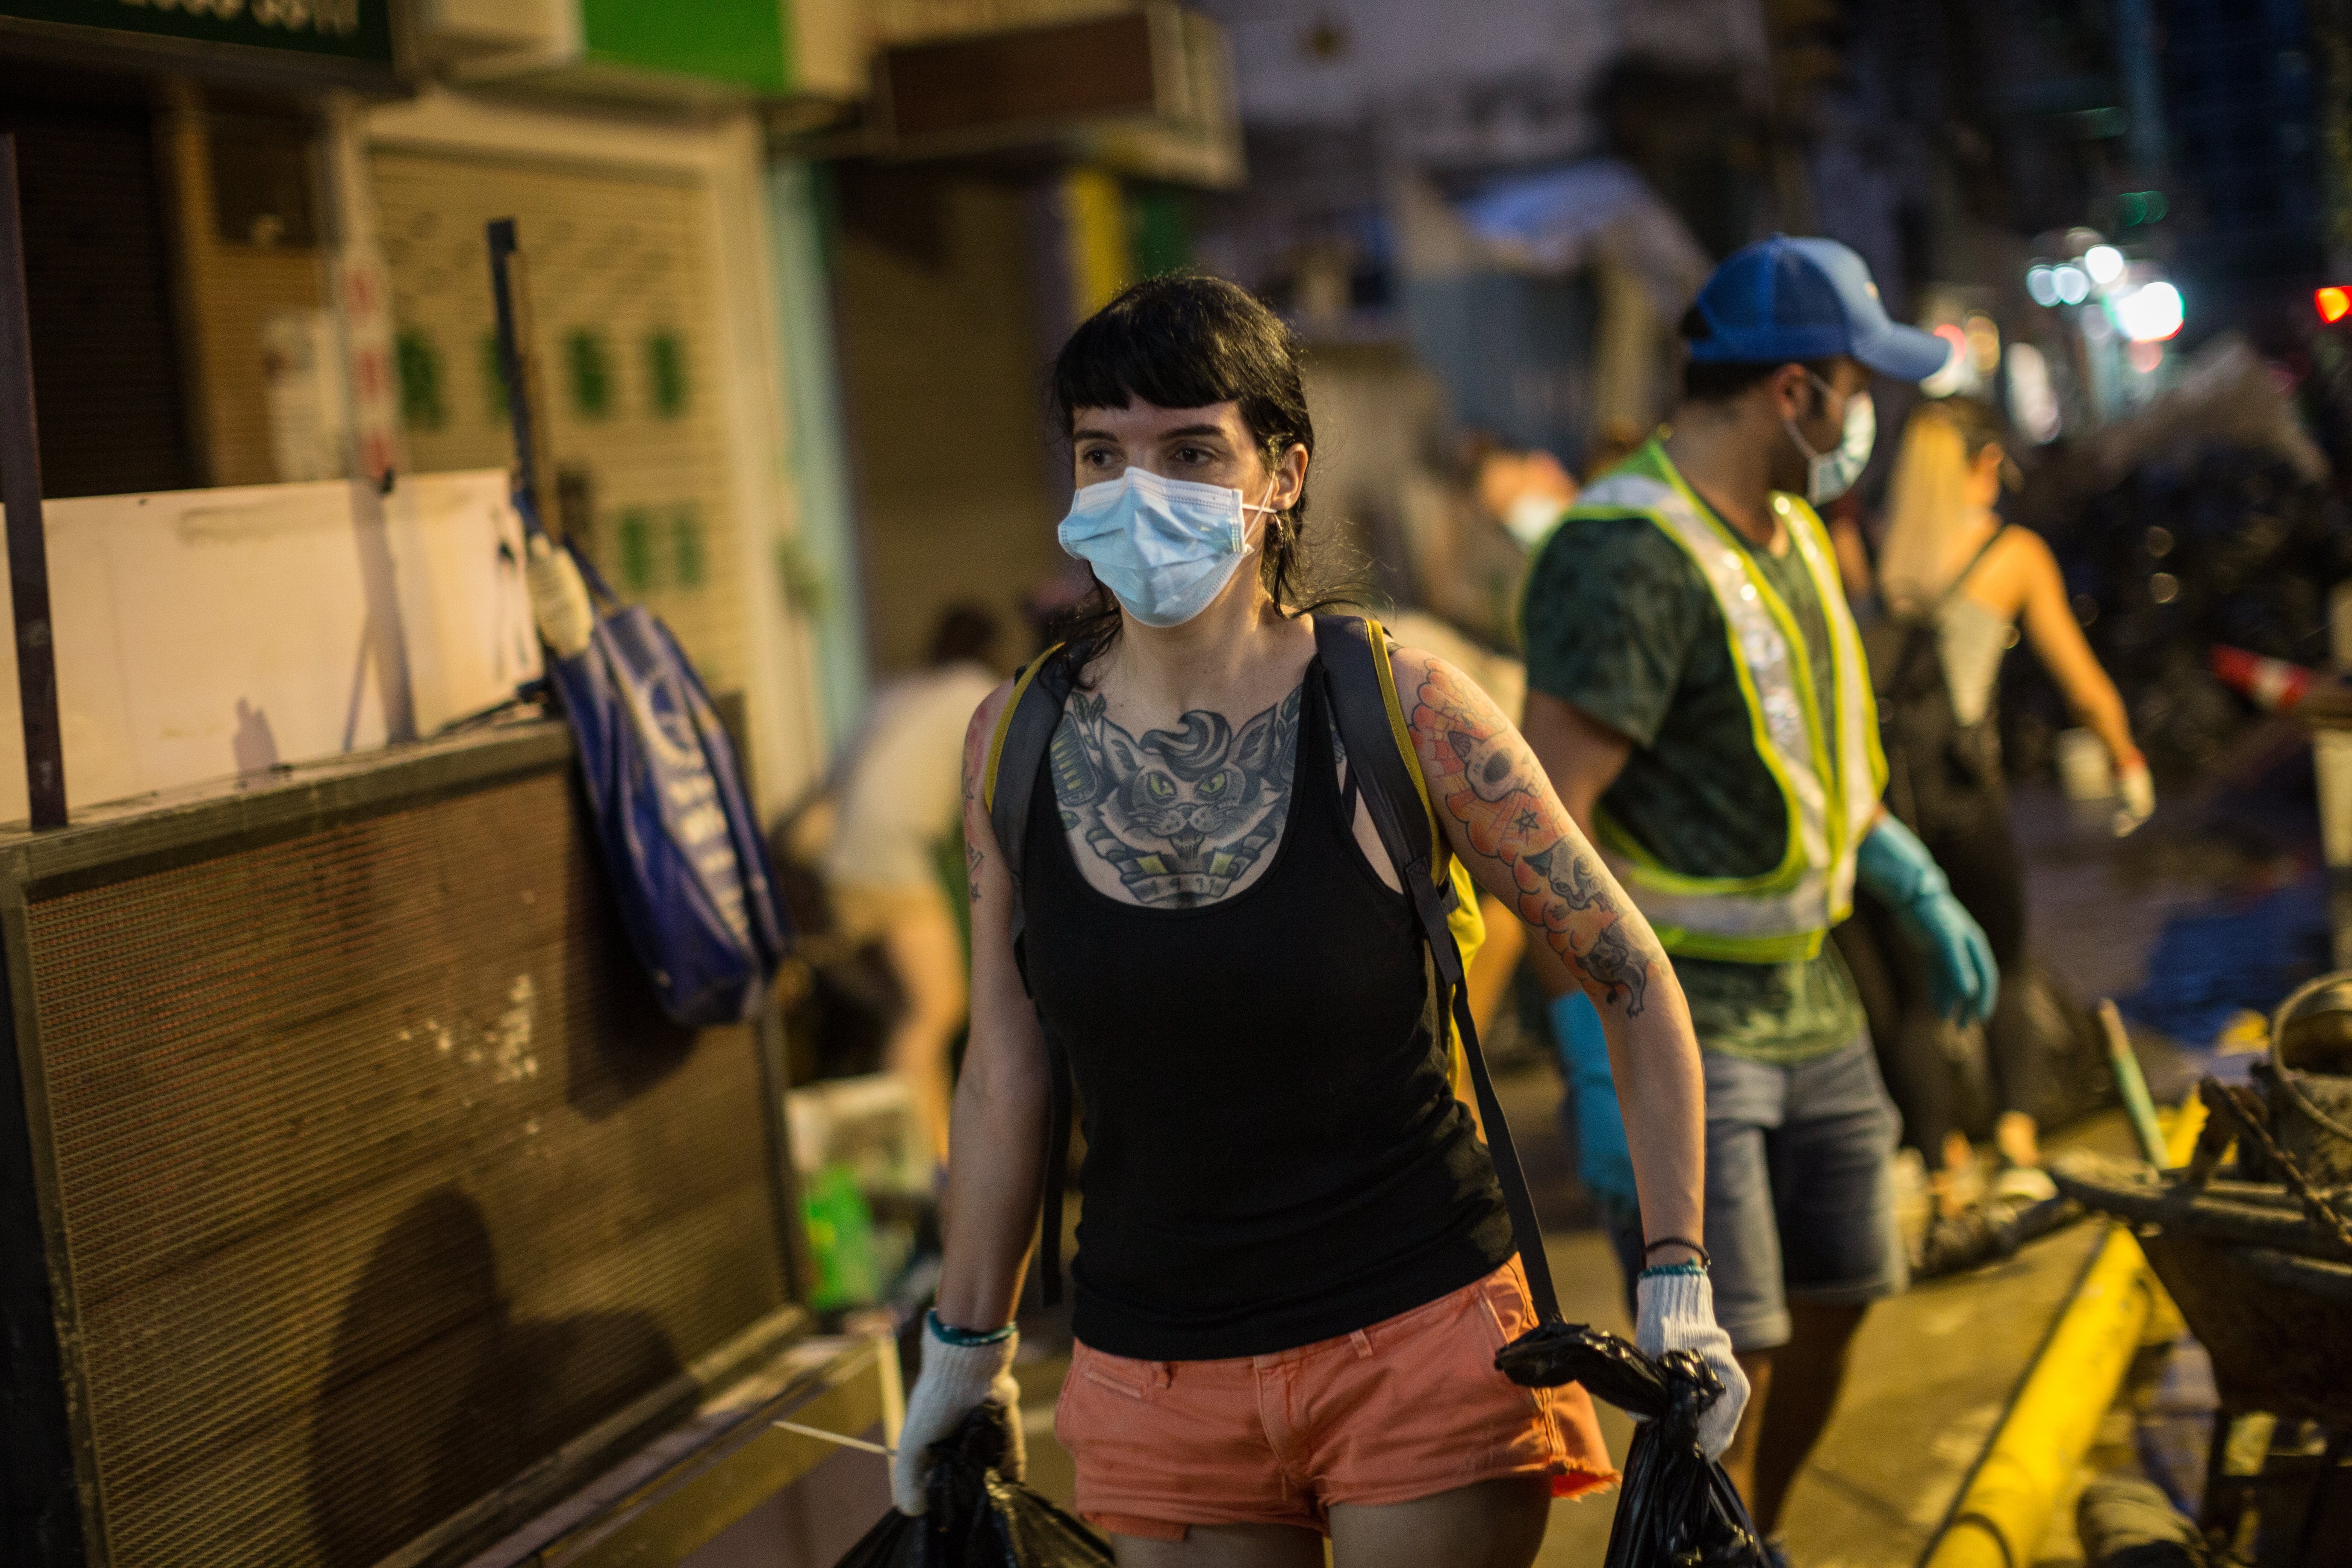 Macau residents volunteer to clean up debris on the streets on August 25, in the wake of Typhoon Hato. Natural disasters that have made the headlines recently magnify the consequences of the political and social choices we’ve made. Photo: EPA